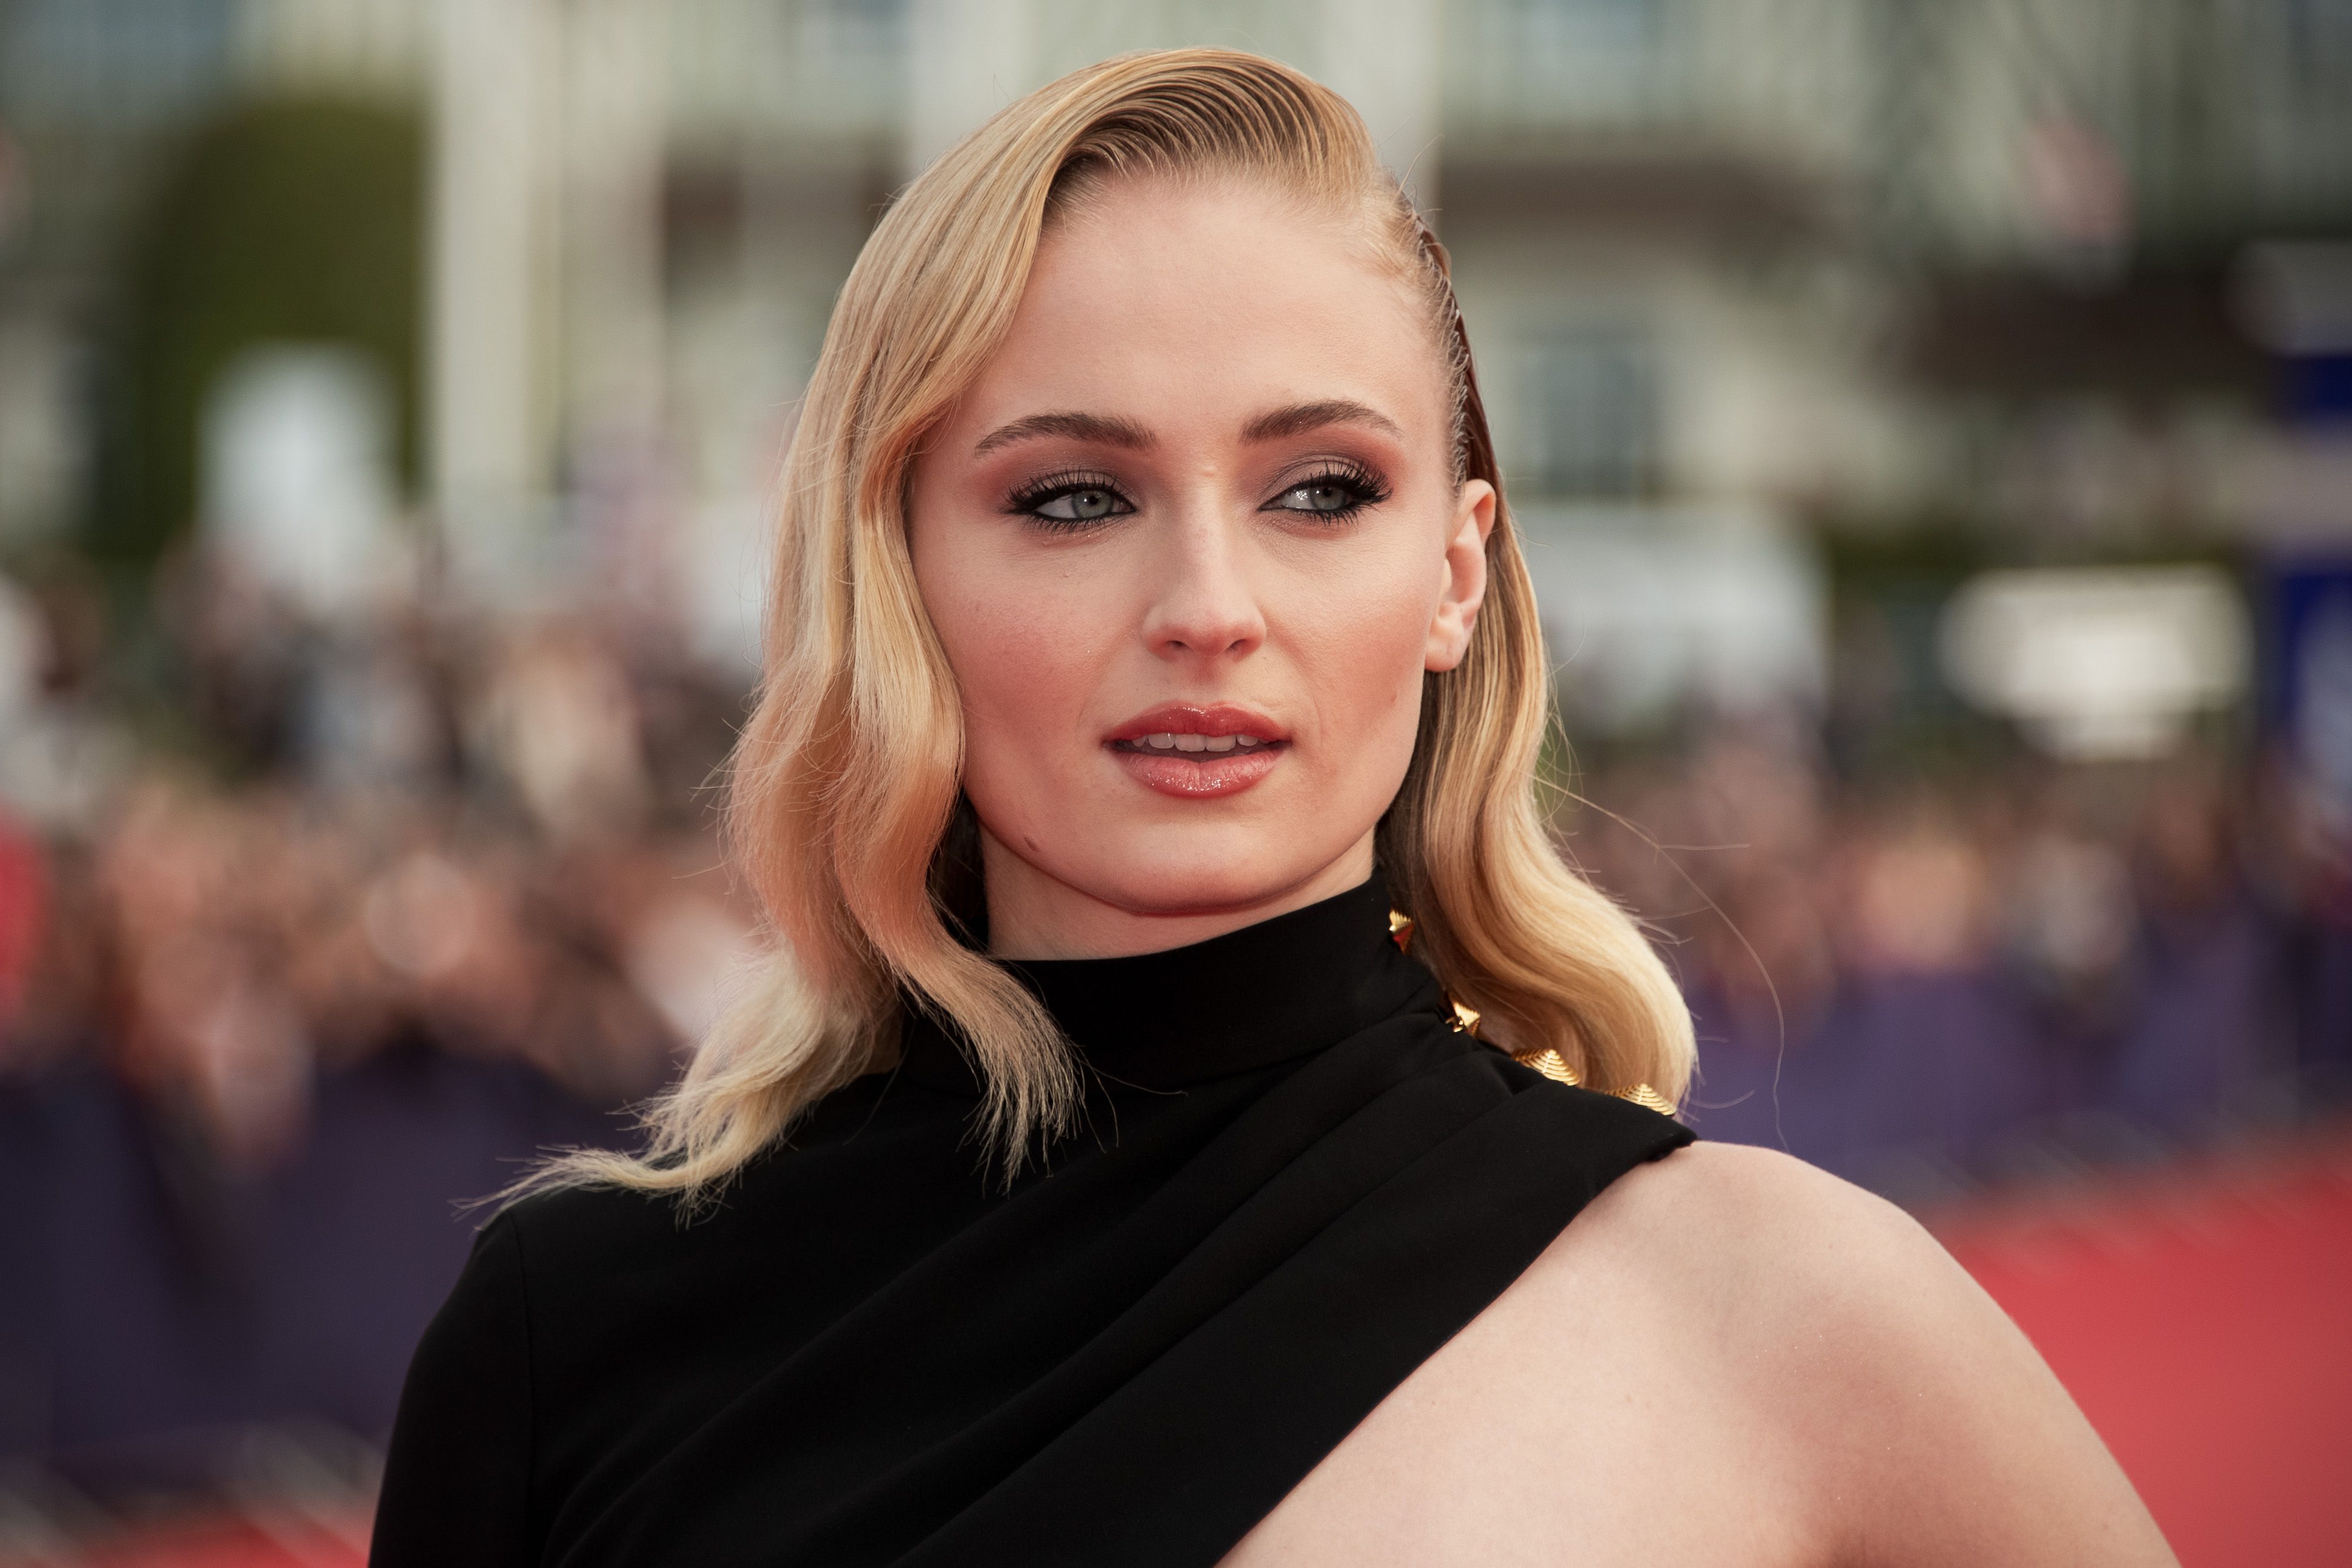 Games of Thrones' star Sophie Turner reveals why she was seen